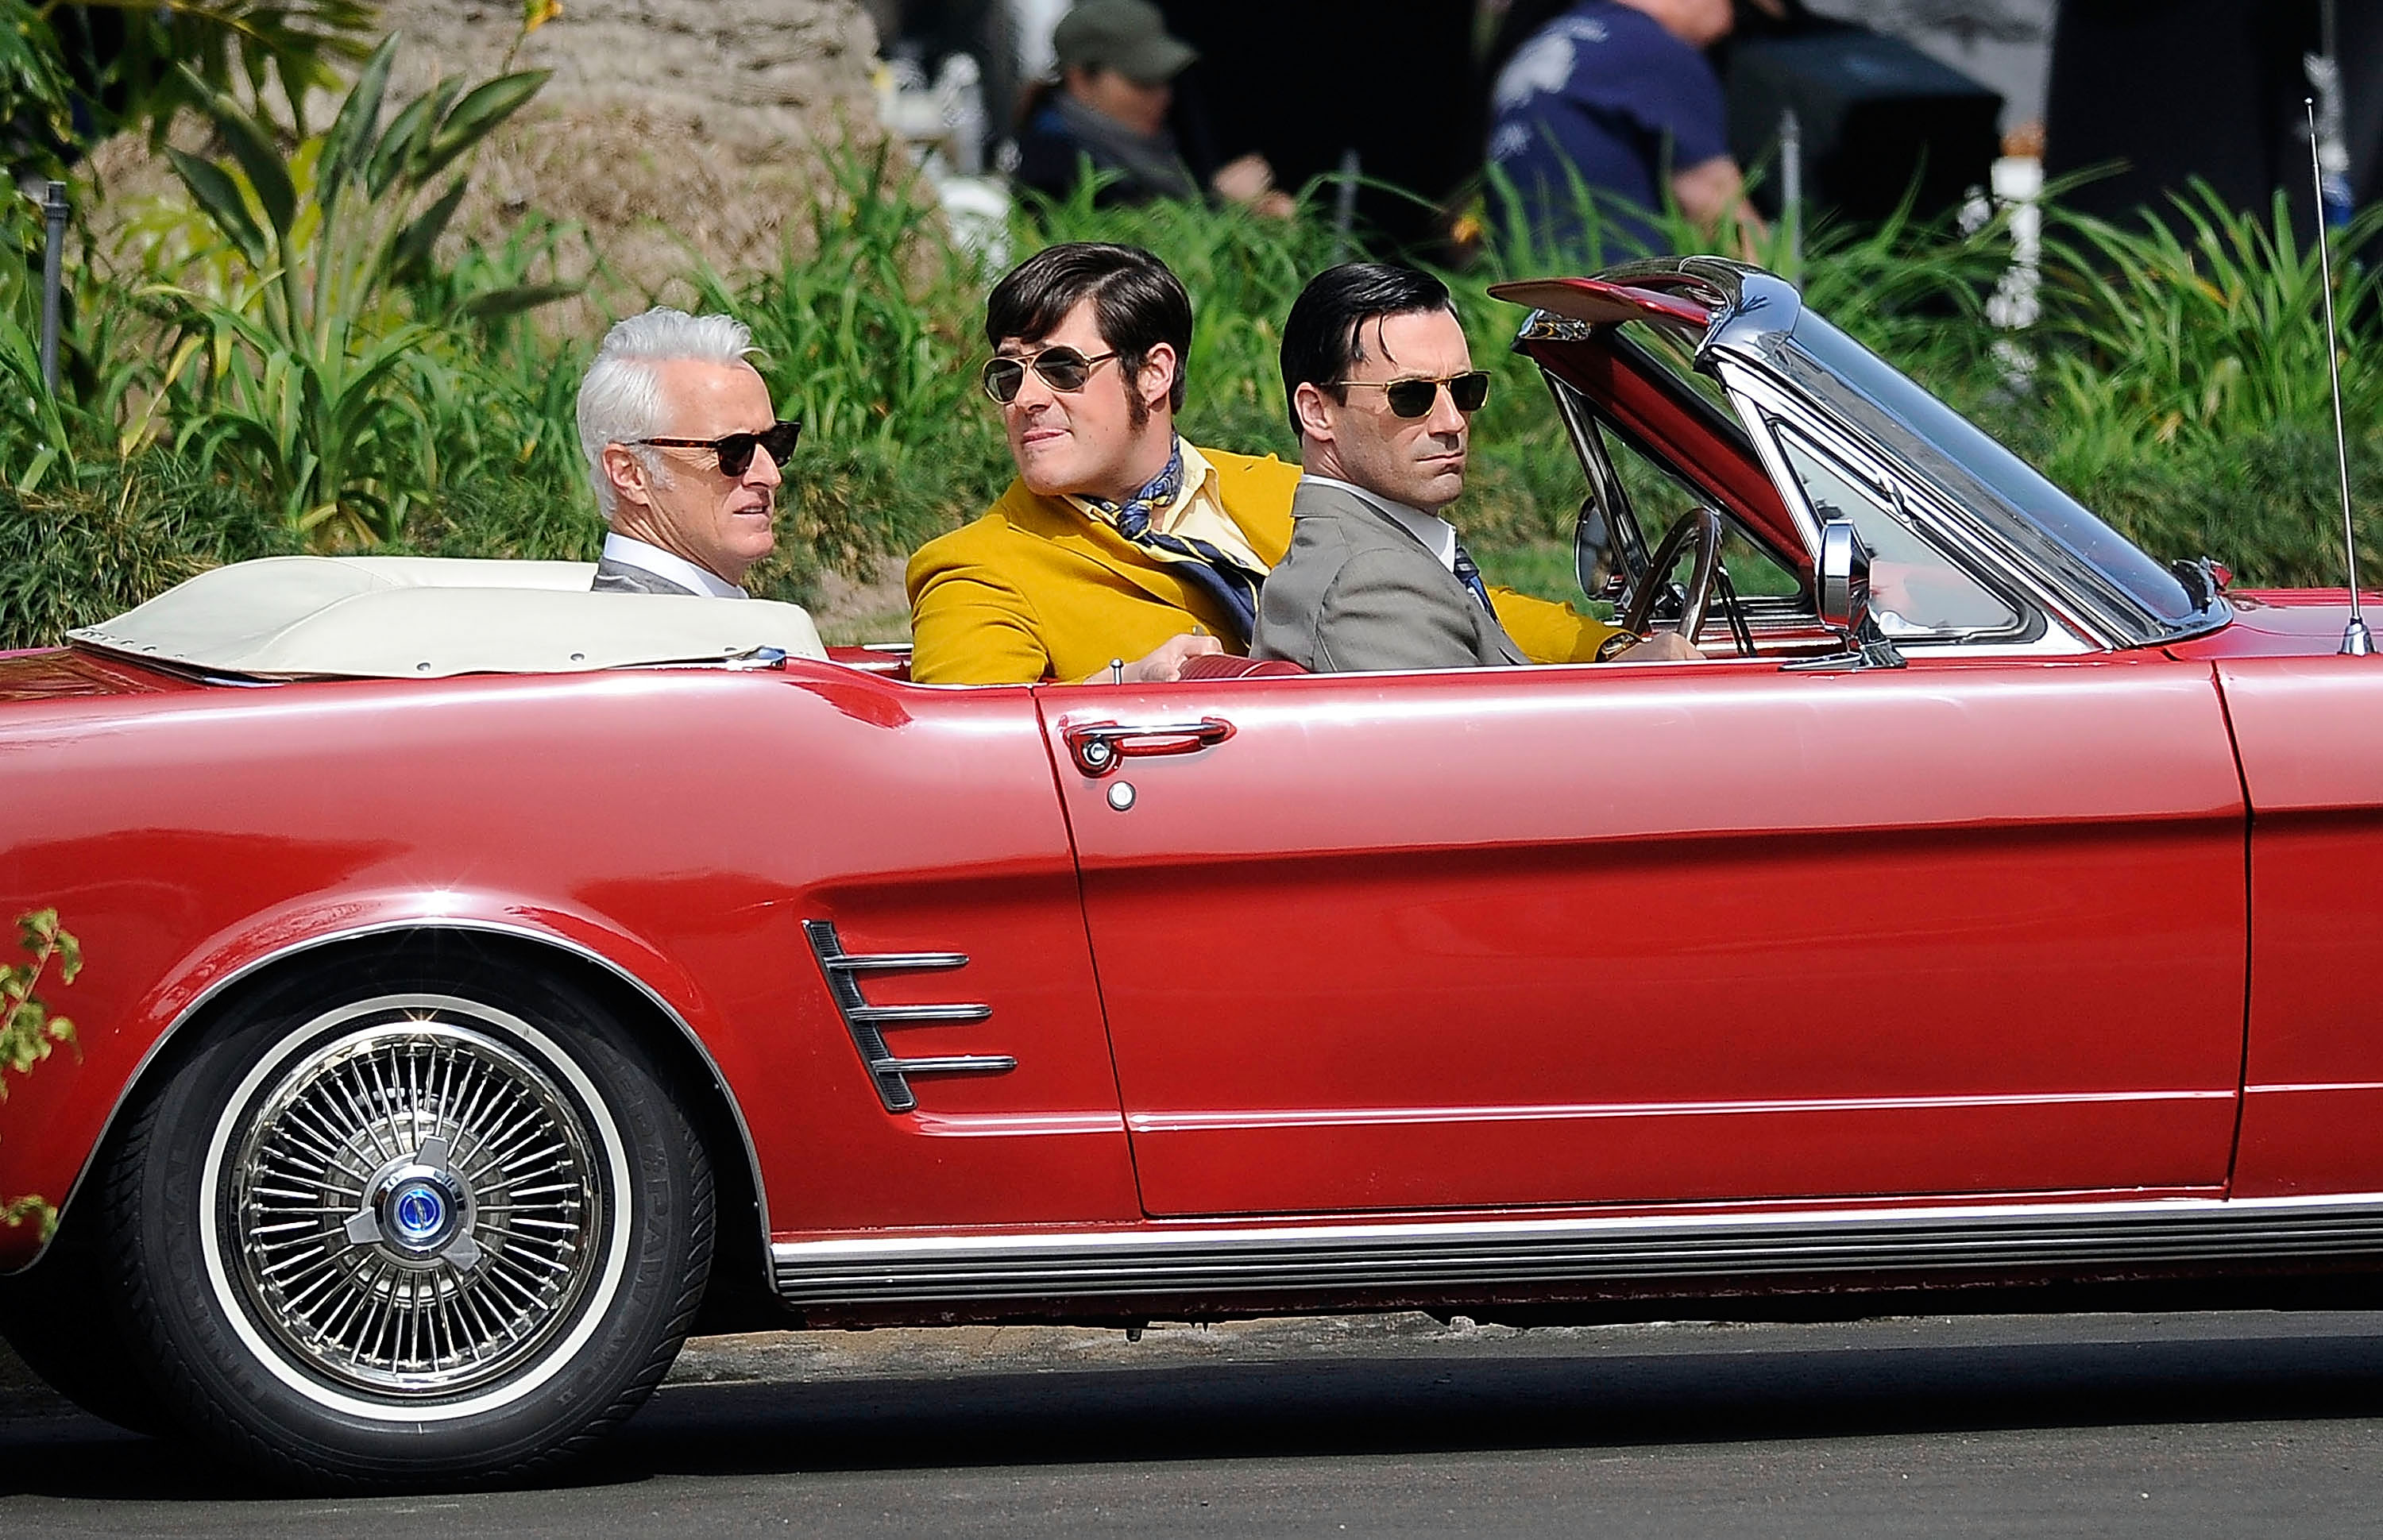 John Slattery, Rich Sommer and Jon Hamm are seen filming 'Mad Men' on March 05, 2013